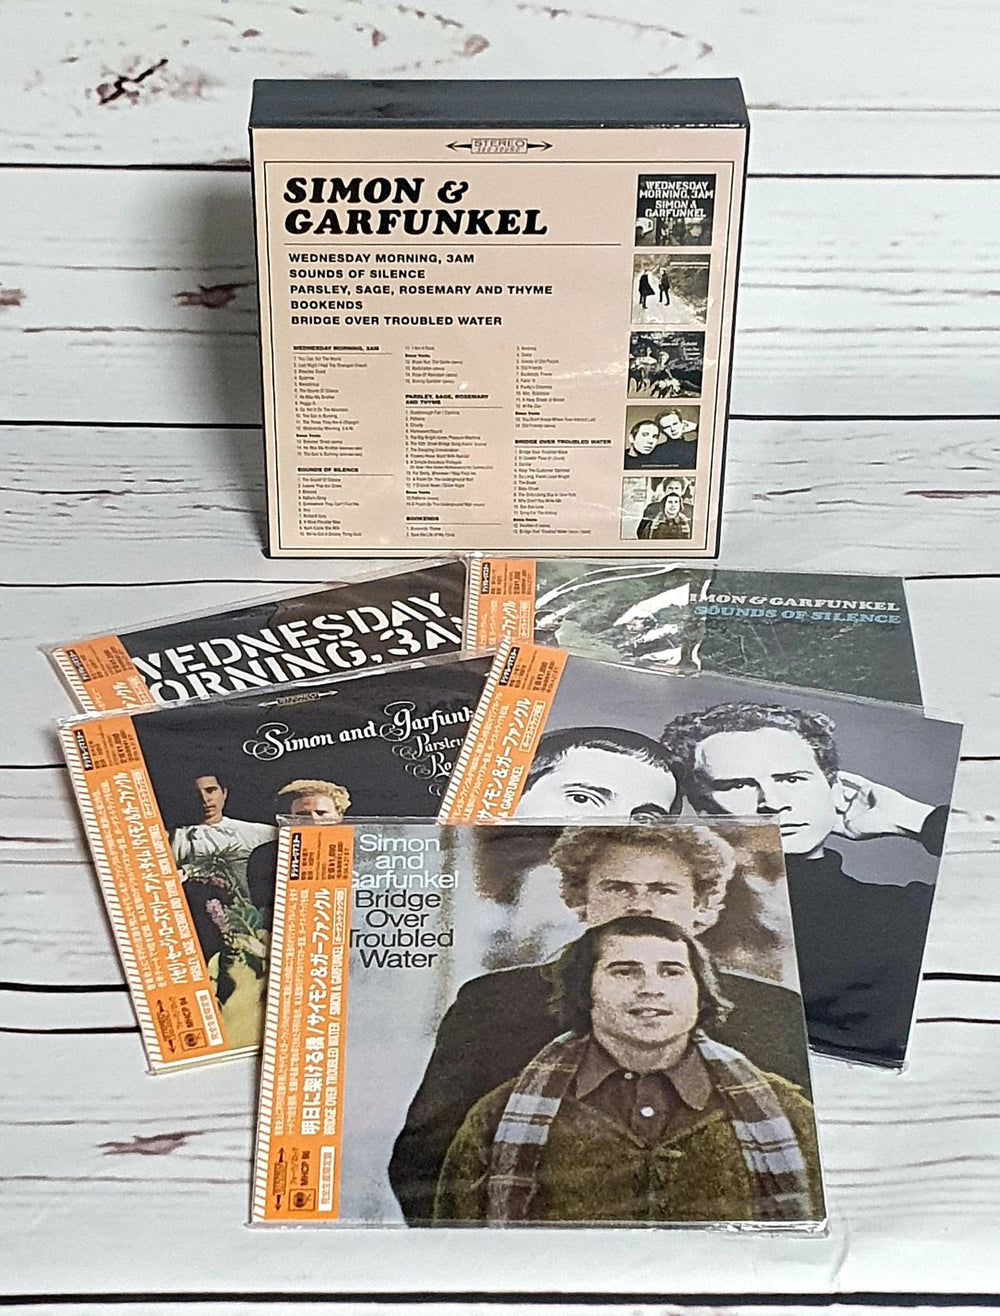 Simon & Garfunkel Bookends - Paper Sleeve Collection Japanese Cd